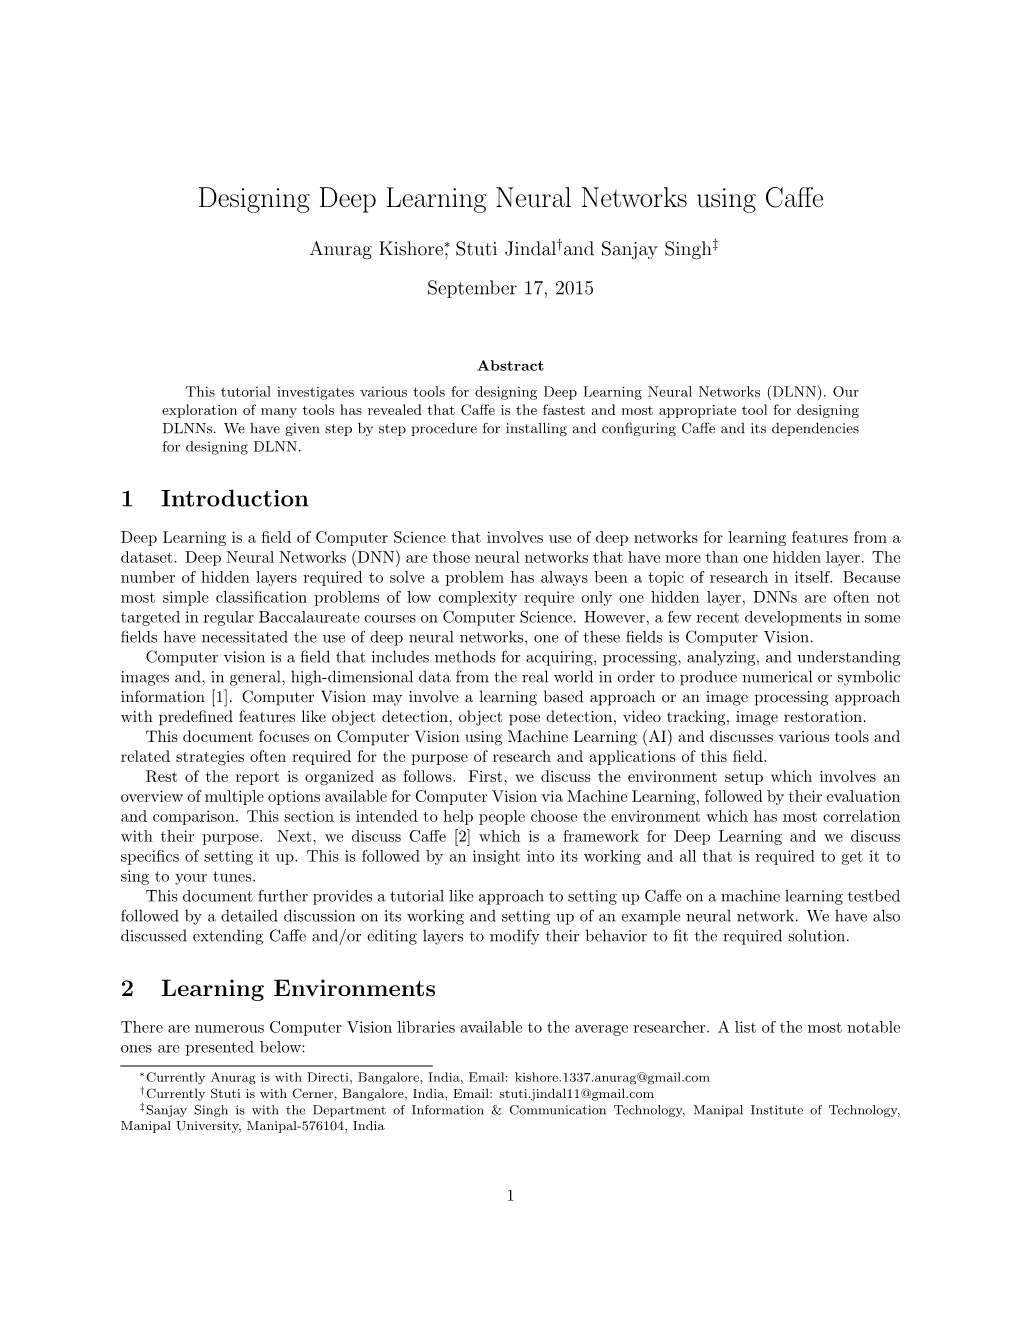 Designing Deep Learning Neural Networks Using Caffe